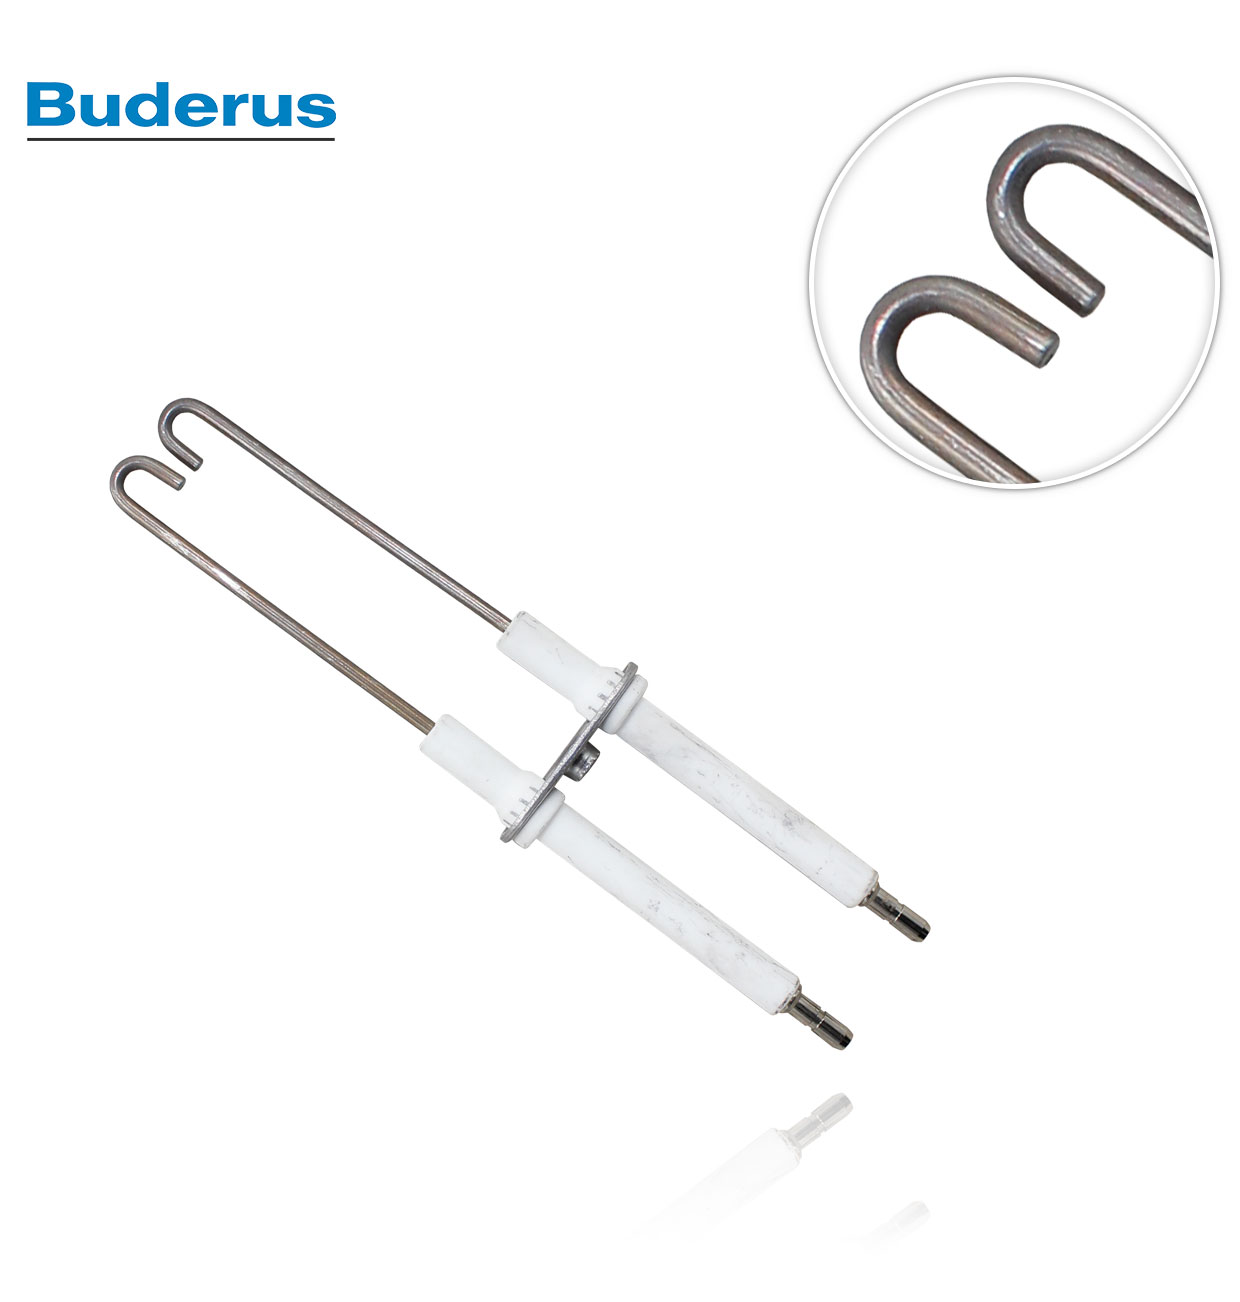 BE1.0-2.2, BE1.3/2.3, BE-A BUDERUS ELECTRODE